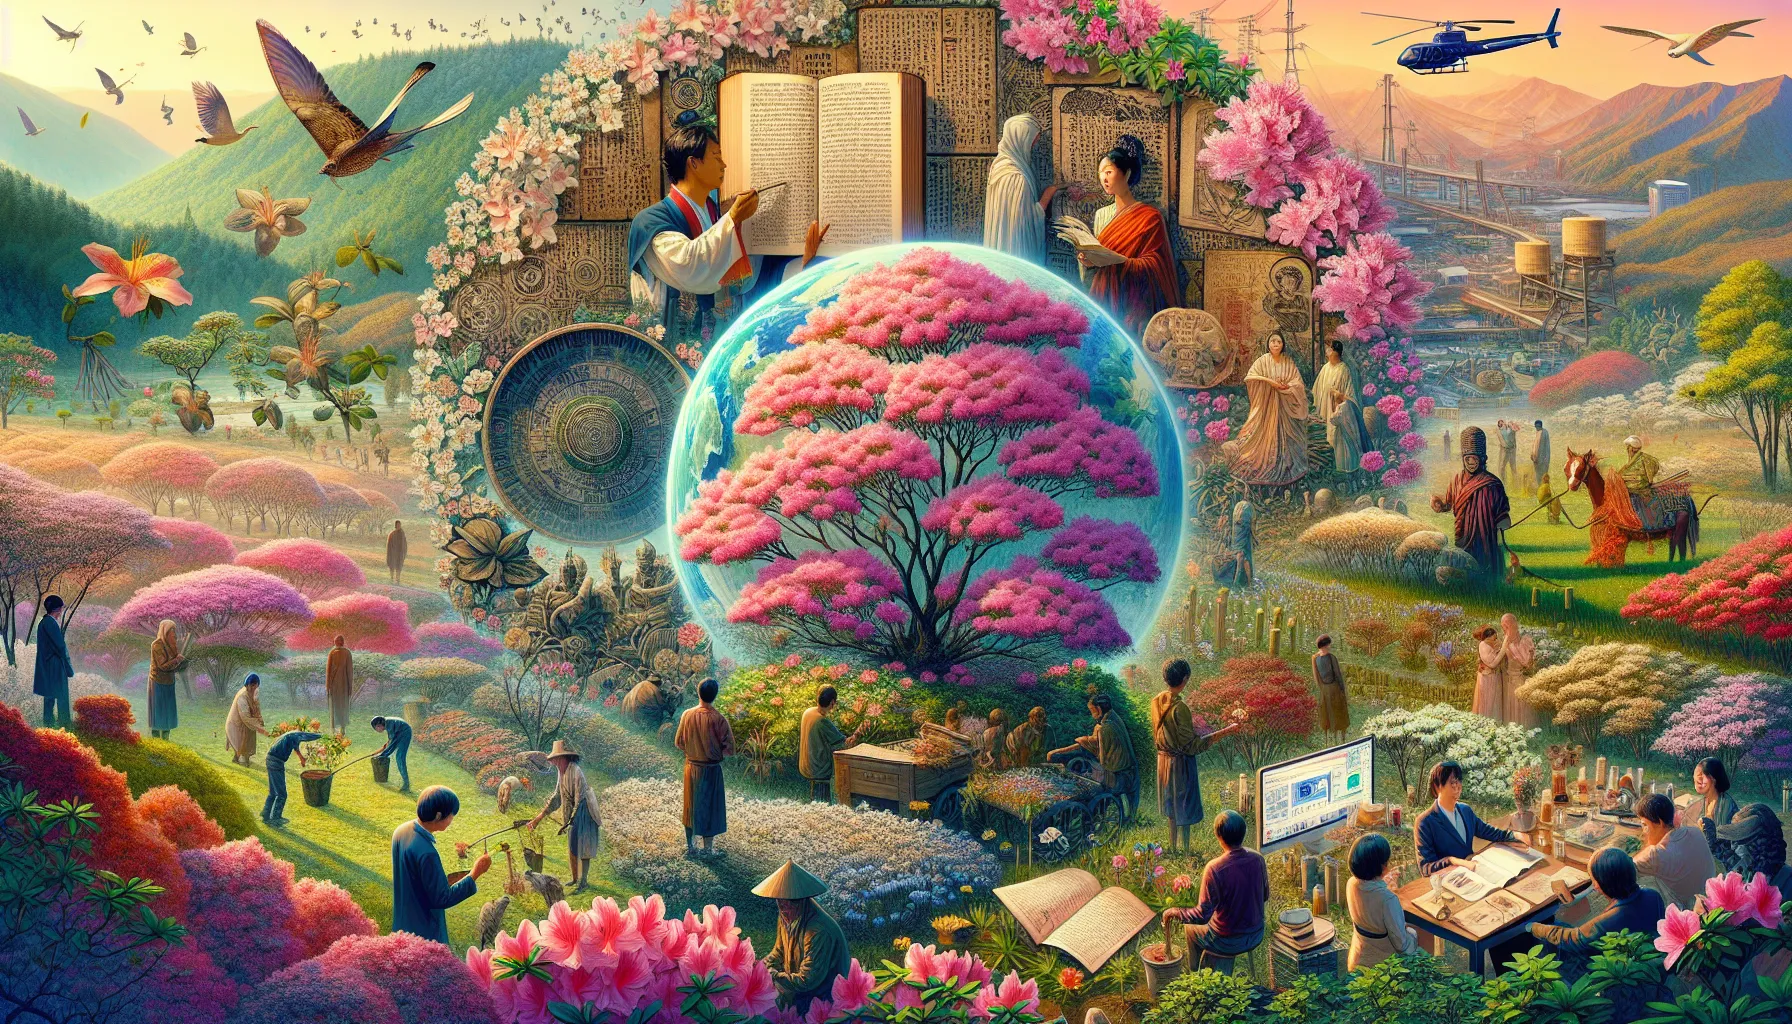 A vibrant illustration exploring the azaleas meaning with people engaged in various activities surrounded by lush, colorful azalea blooms, symbolizing the delicacy and transient nature of life.